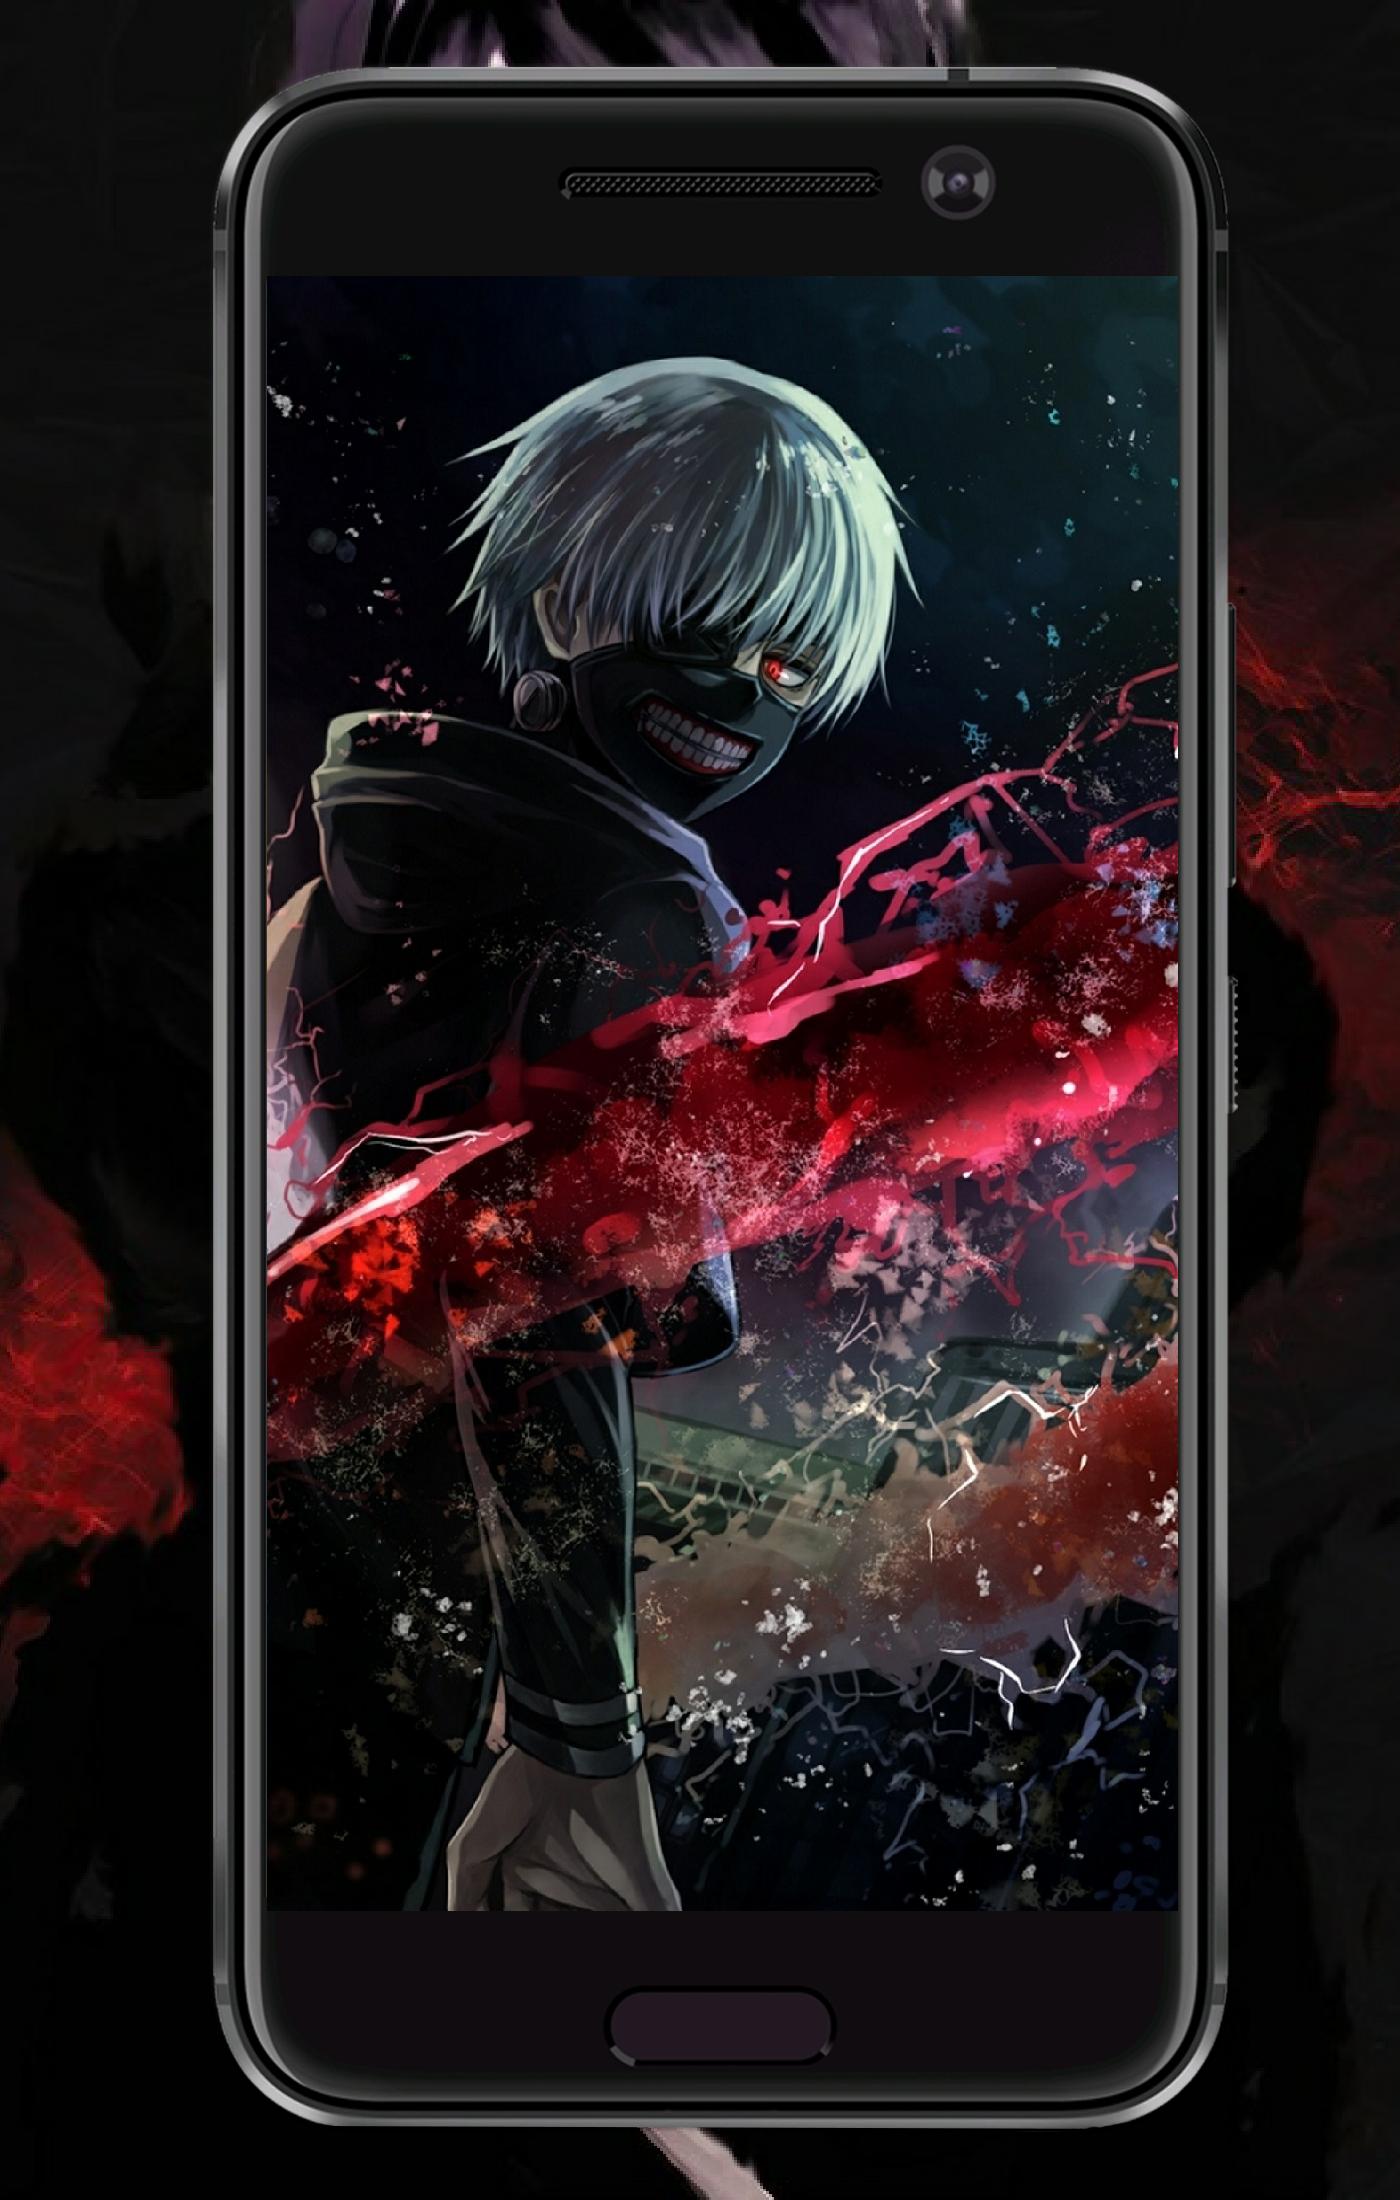 Tokyo Ghoul Wallpaper HD for Android - APK Download